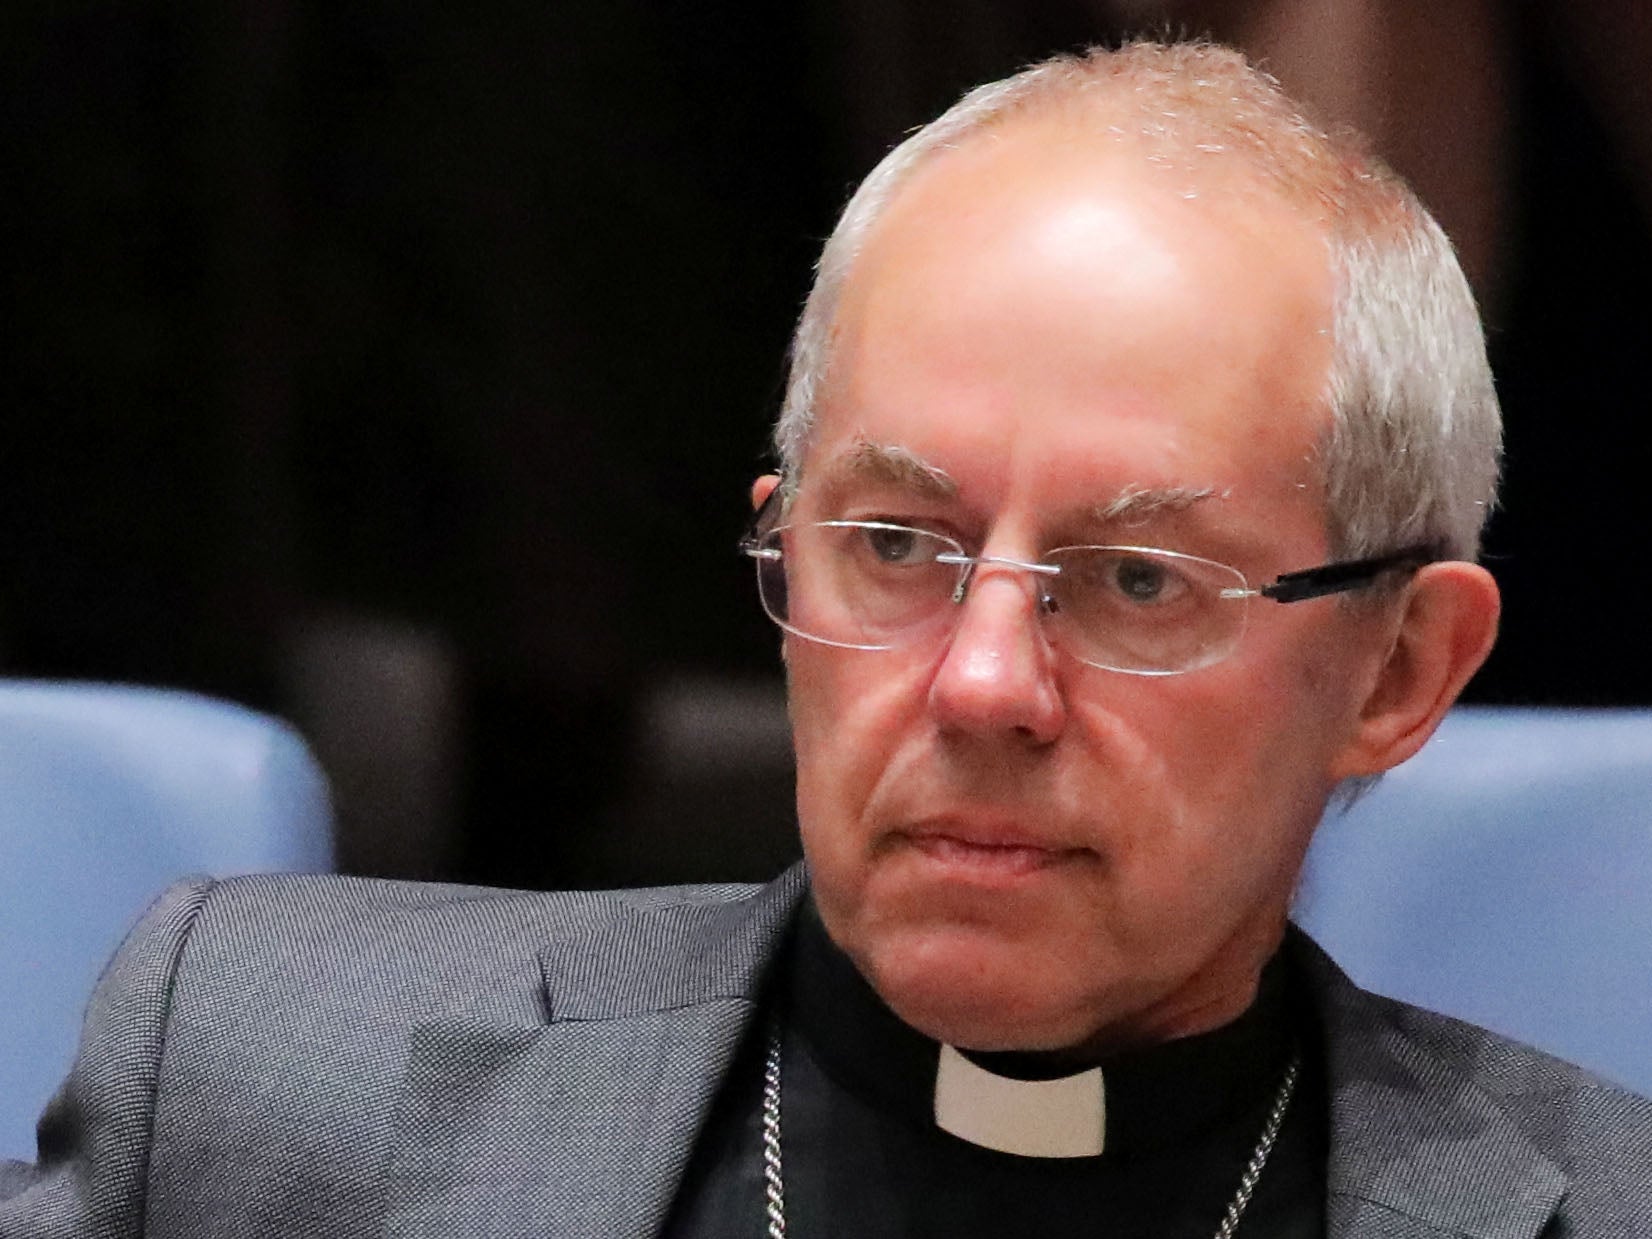 Archbishop of Canterbury Justin Welby sits before addressing the United Nations Security Council on 29 August, 2018